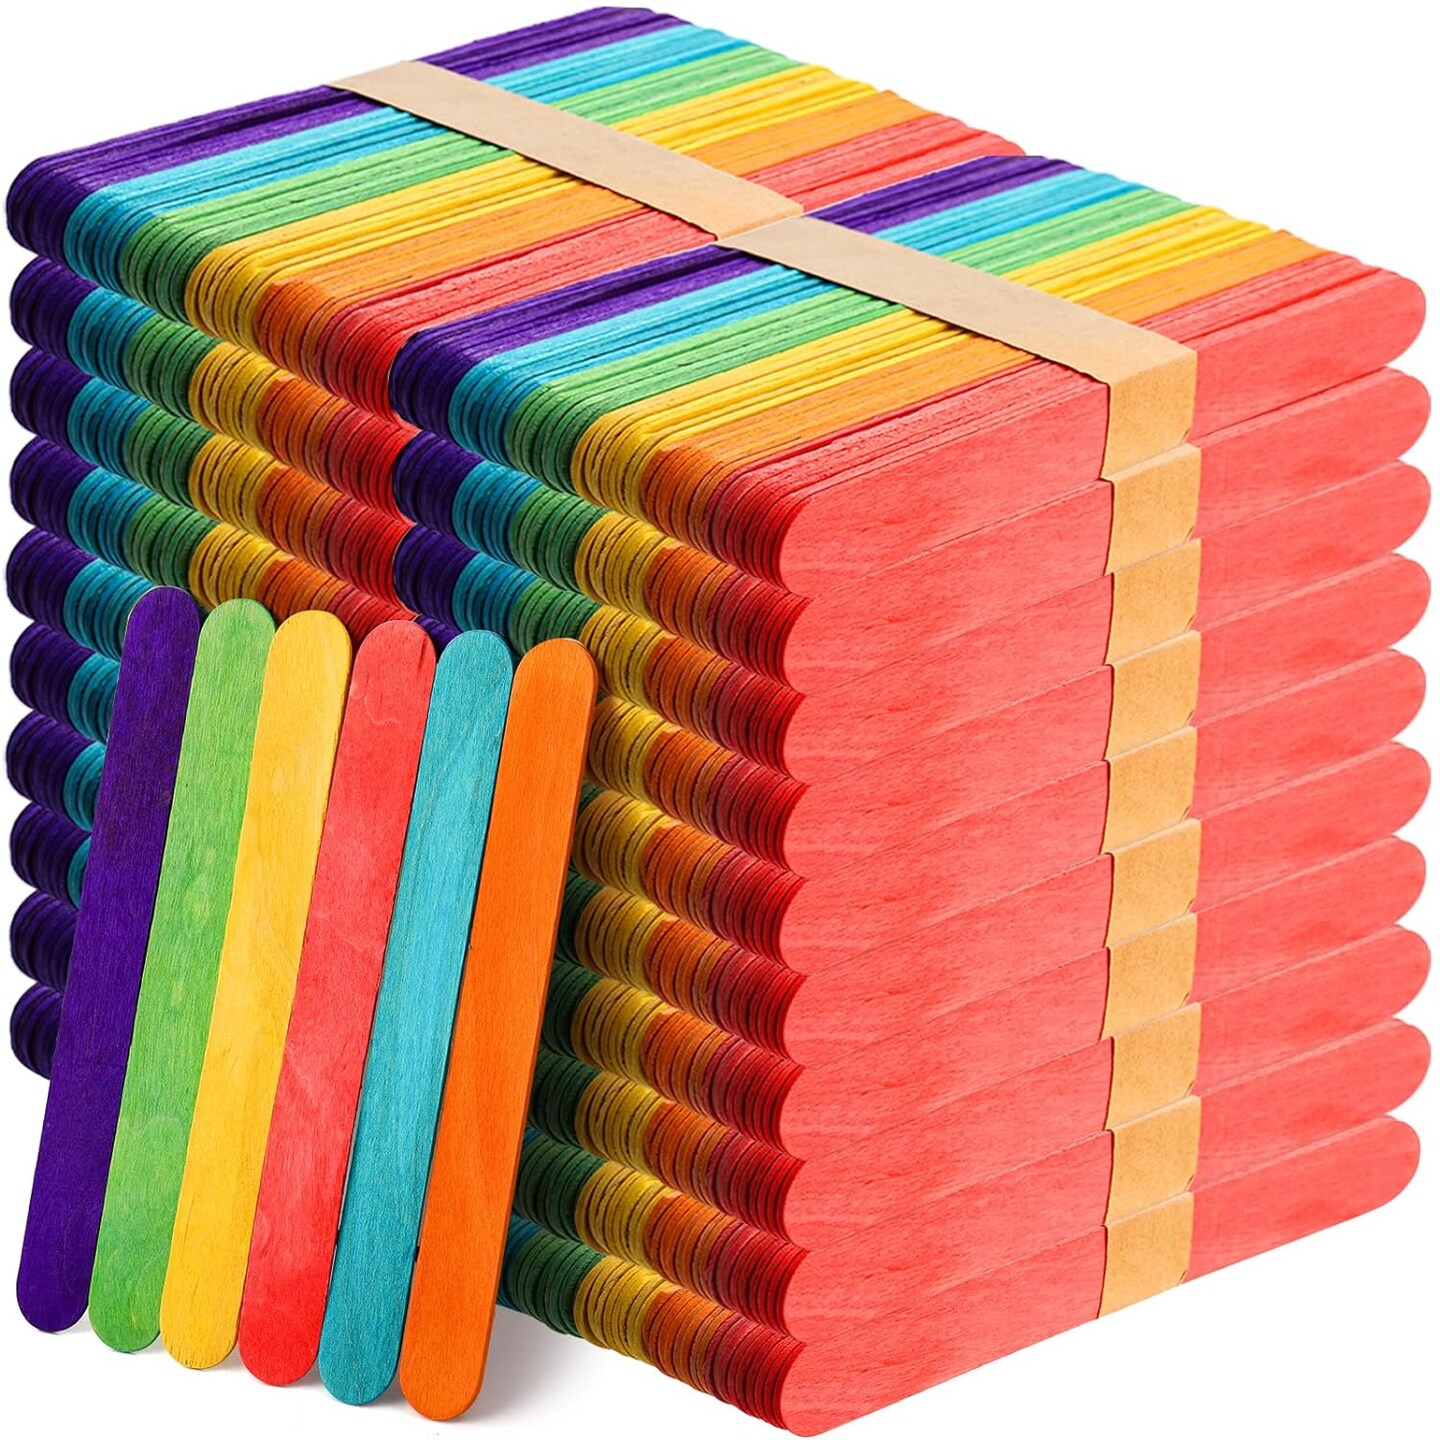 1000 Pack Colored Craft Sticks, 6 Inch Wooden Popsicle Sticks, Ice Pop Ice Cream Sticks Jumbo Wood Sticks for Kids&#x27; Art, DIY Projects, Home Classroom Craft Supplies